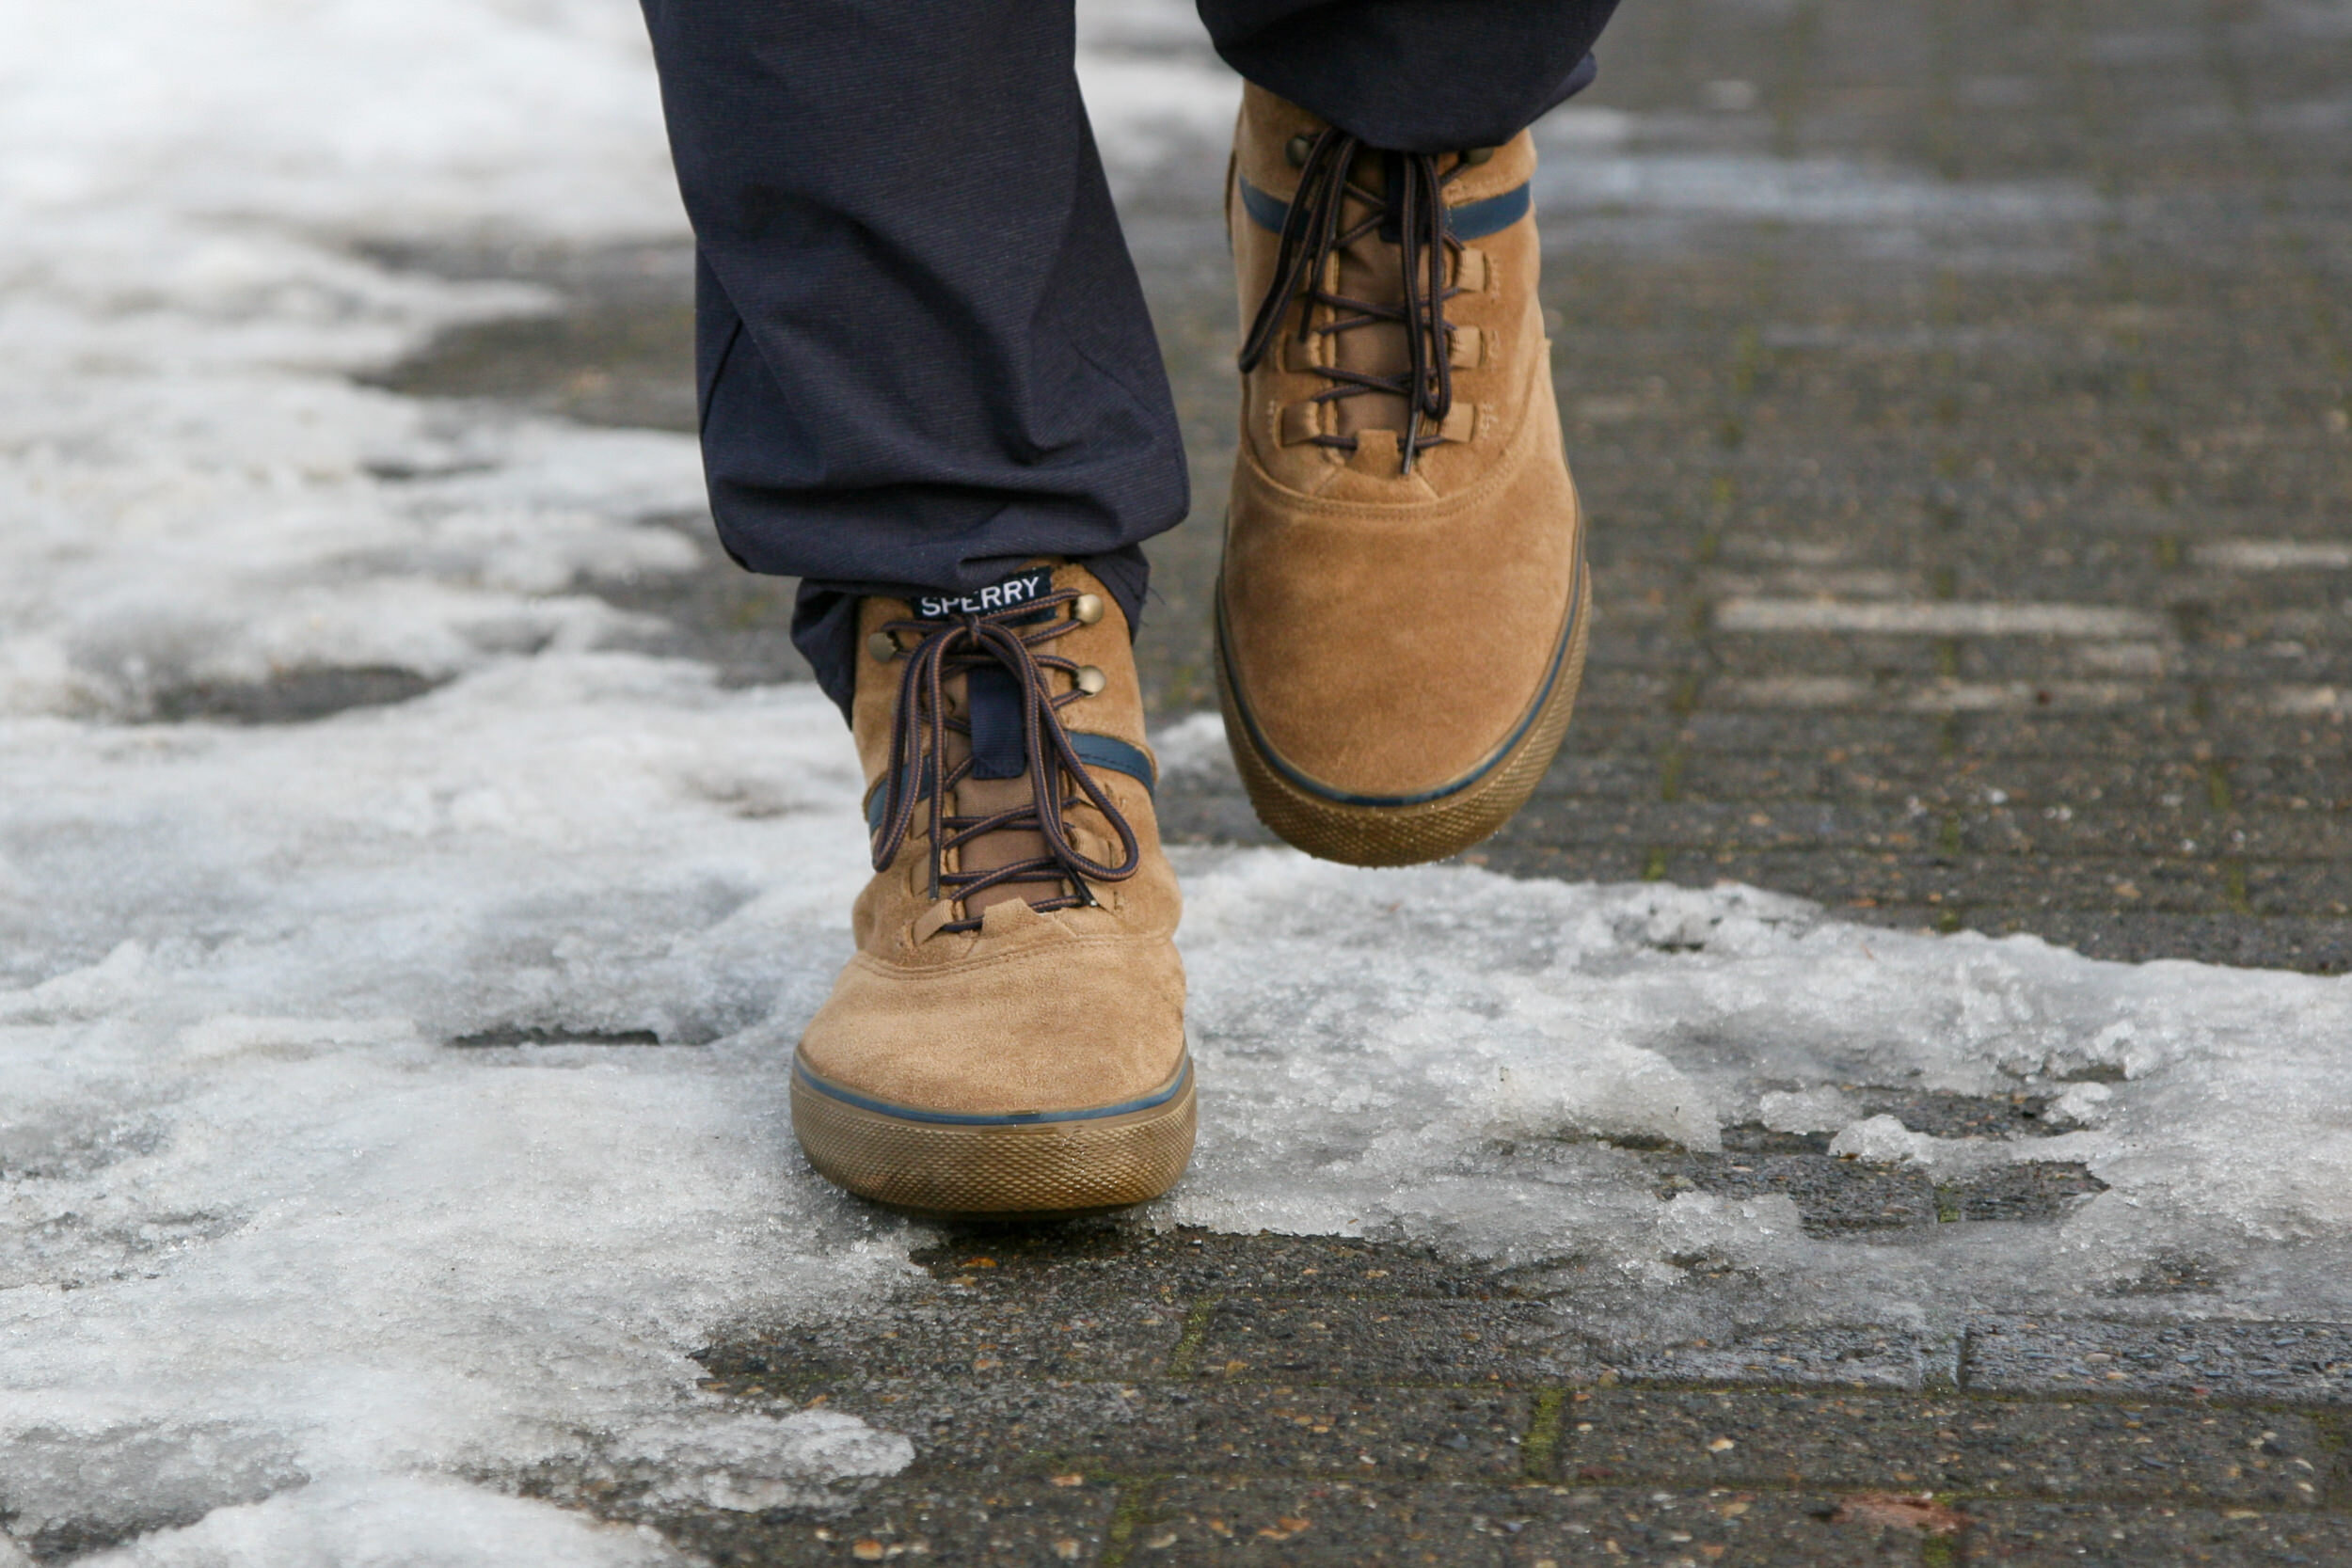 Sperry’s Striper Storm Boots are stylish and comfortable for wearing around town in wet, cold conditions